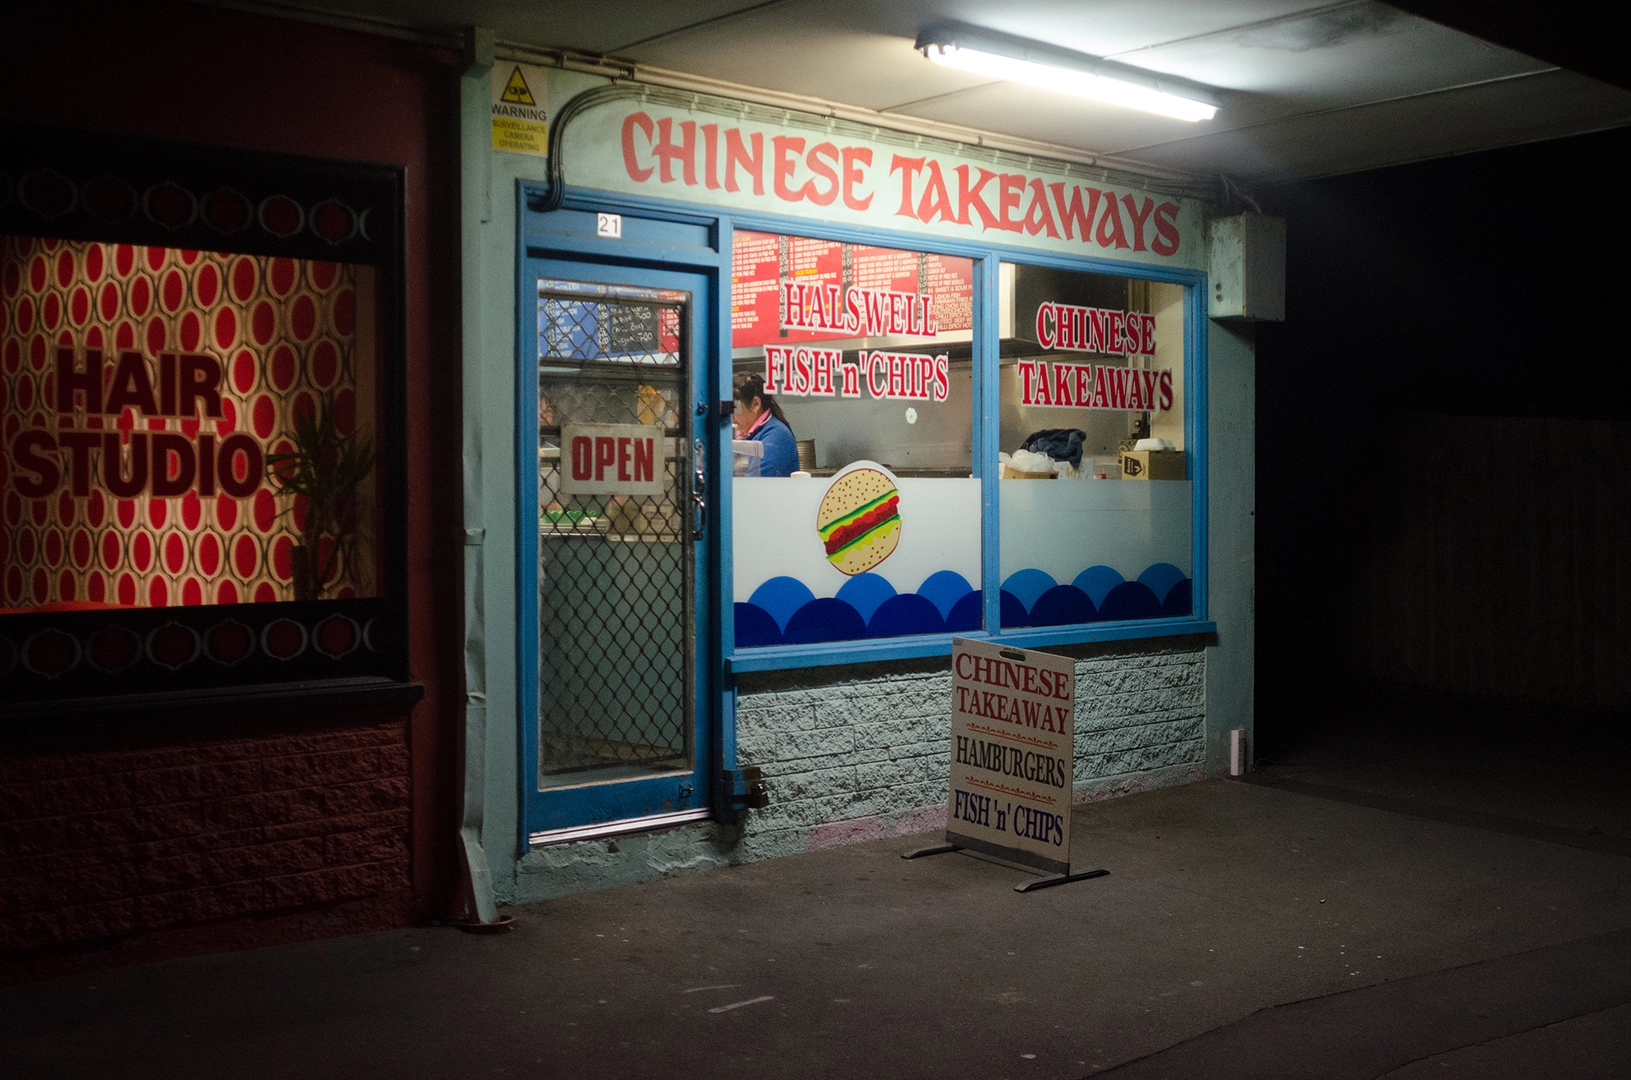 Chinese Takeaways, Halswell Fish and Chips, Lillian Street